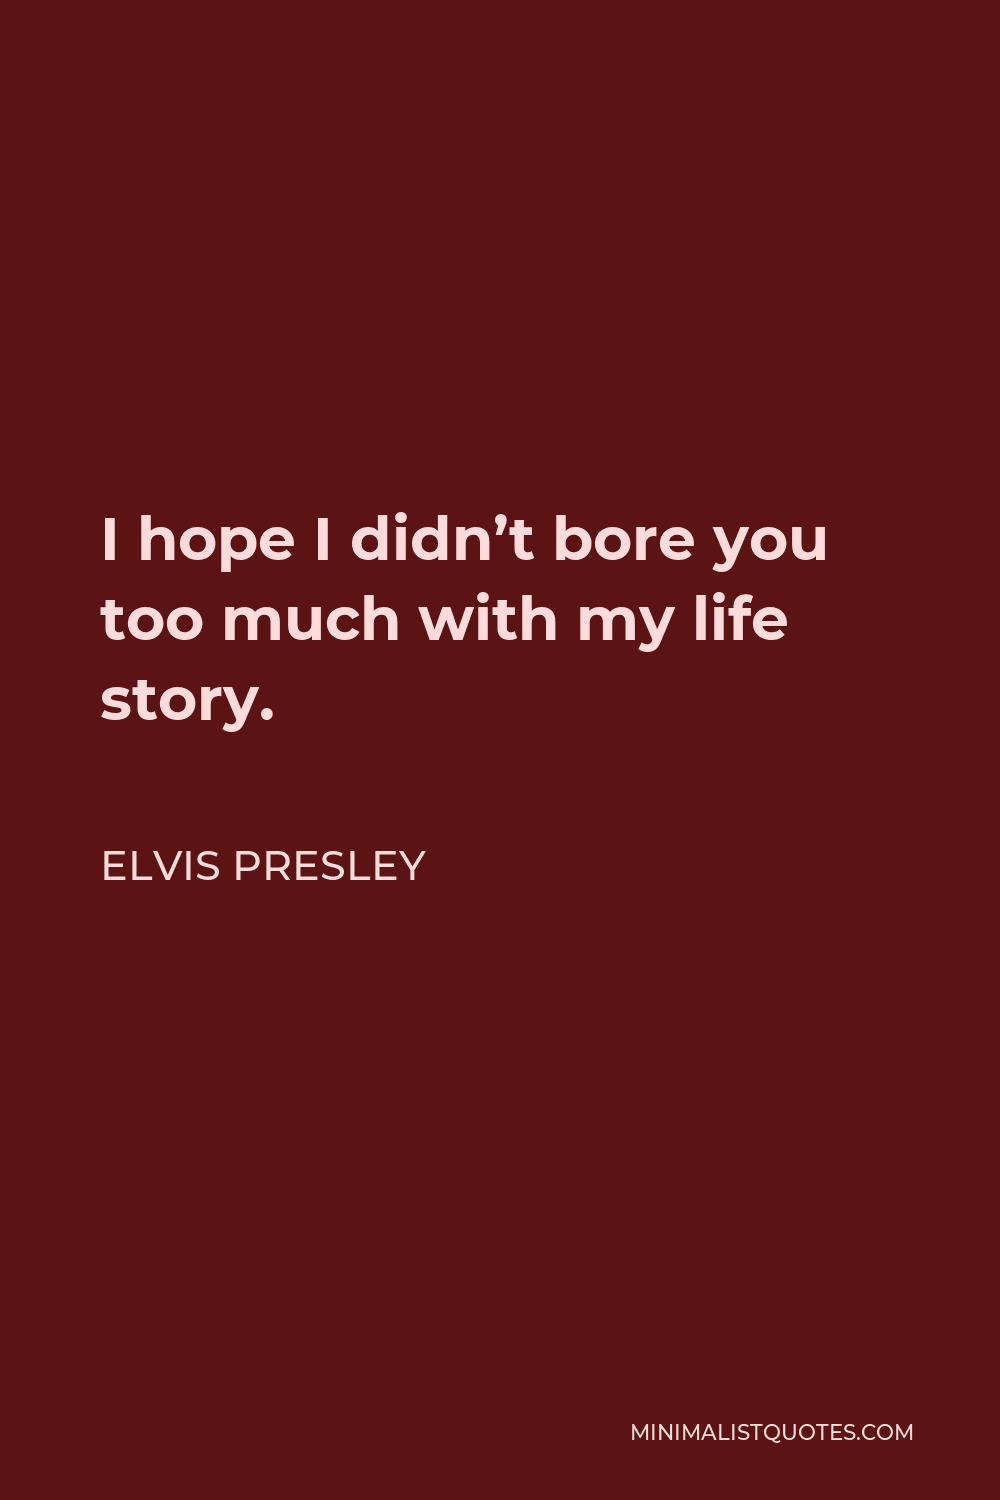 Elvis Presley Quote - I hope I didn’t bore you too much with my life story.